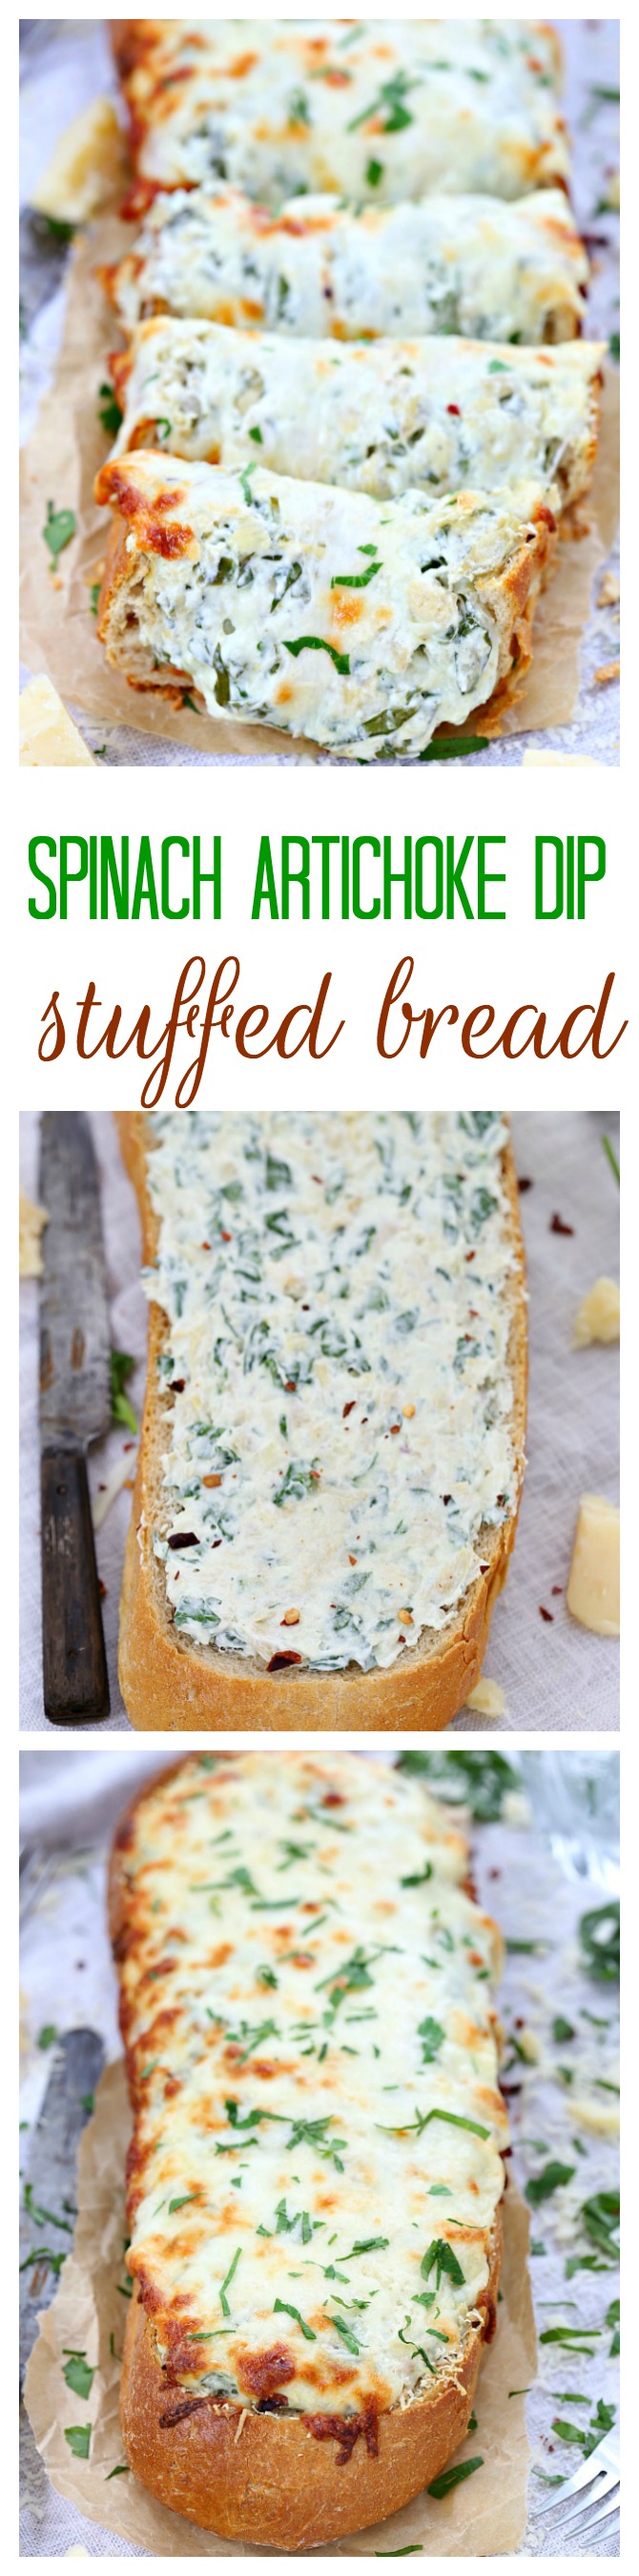 Three types of cheese and a dollop of yogurt make this spinach artichoke dip stuffed bread incredibly creamy and cheesy. It is a guaranteed hit with the crowd and always disappears – no leftovers in sight!